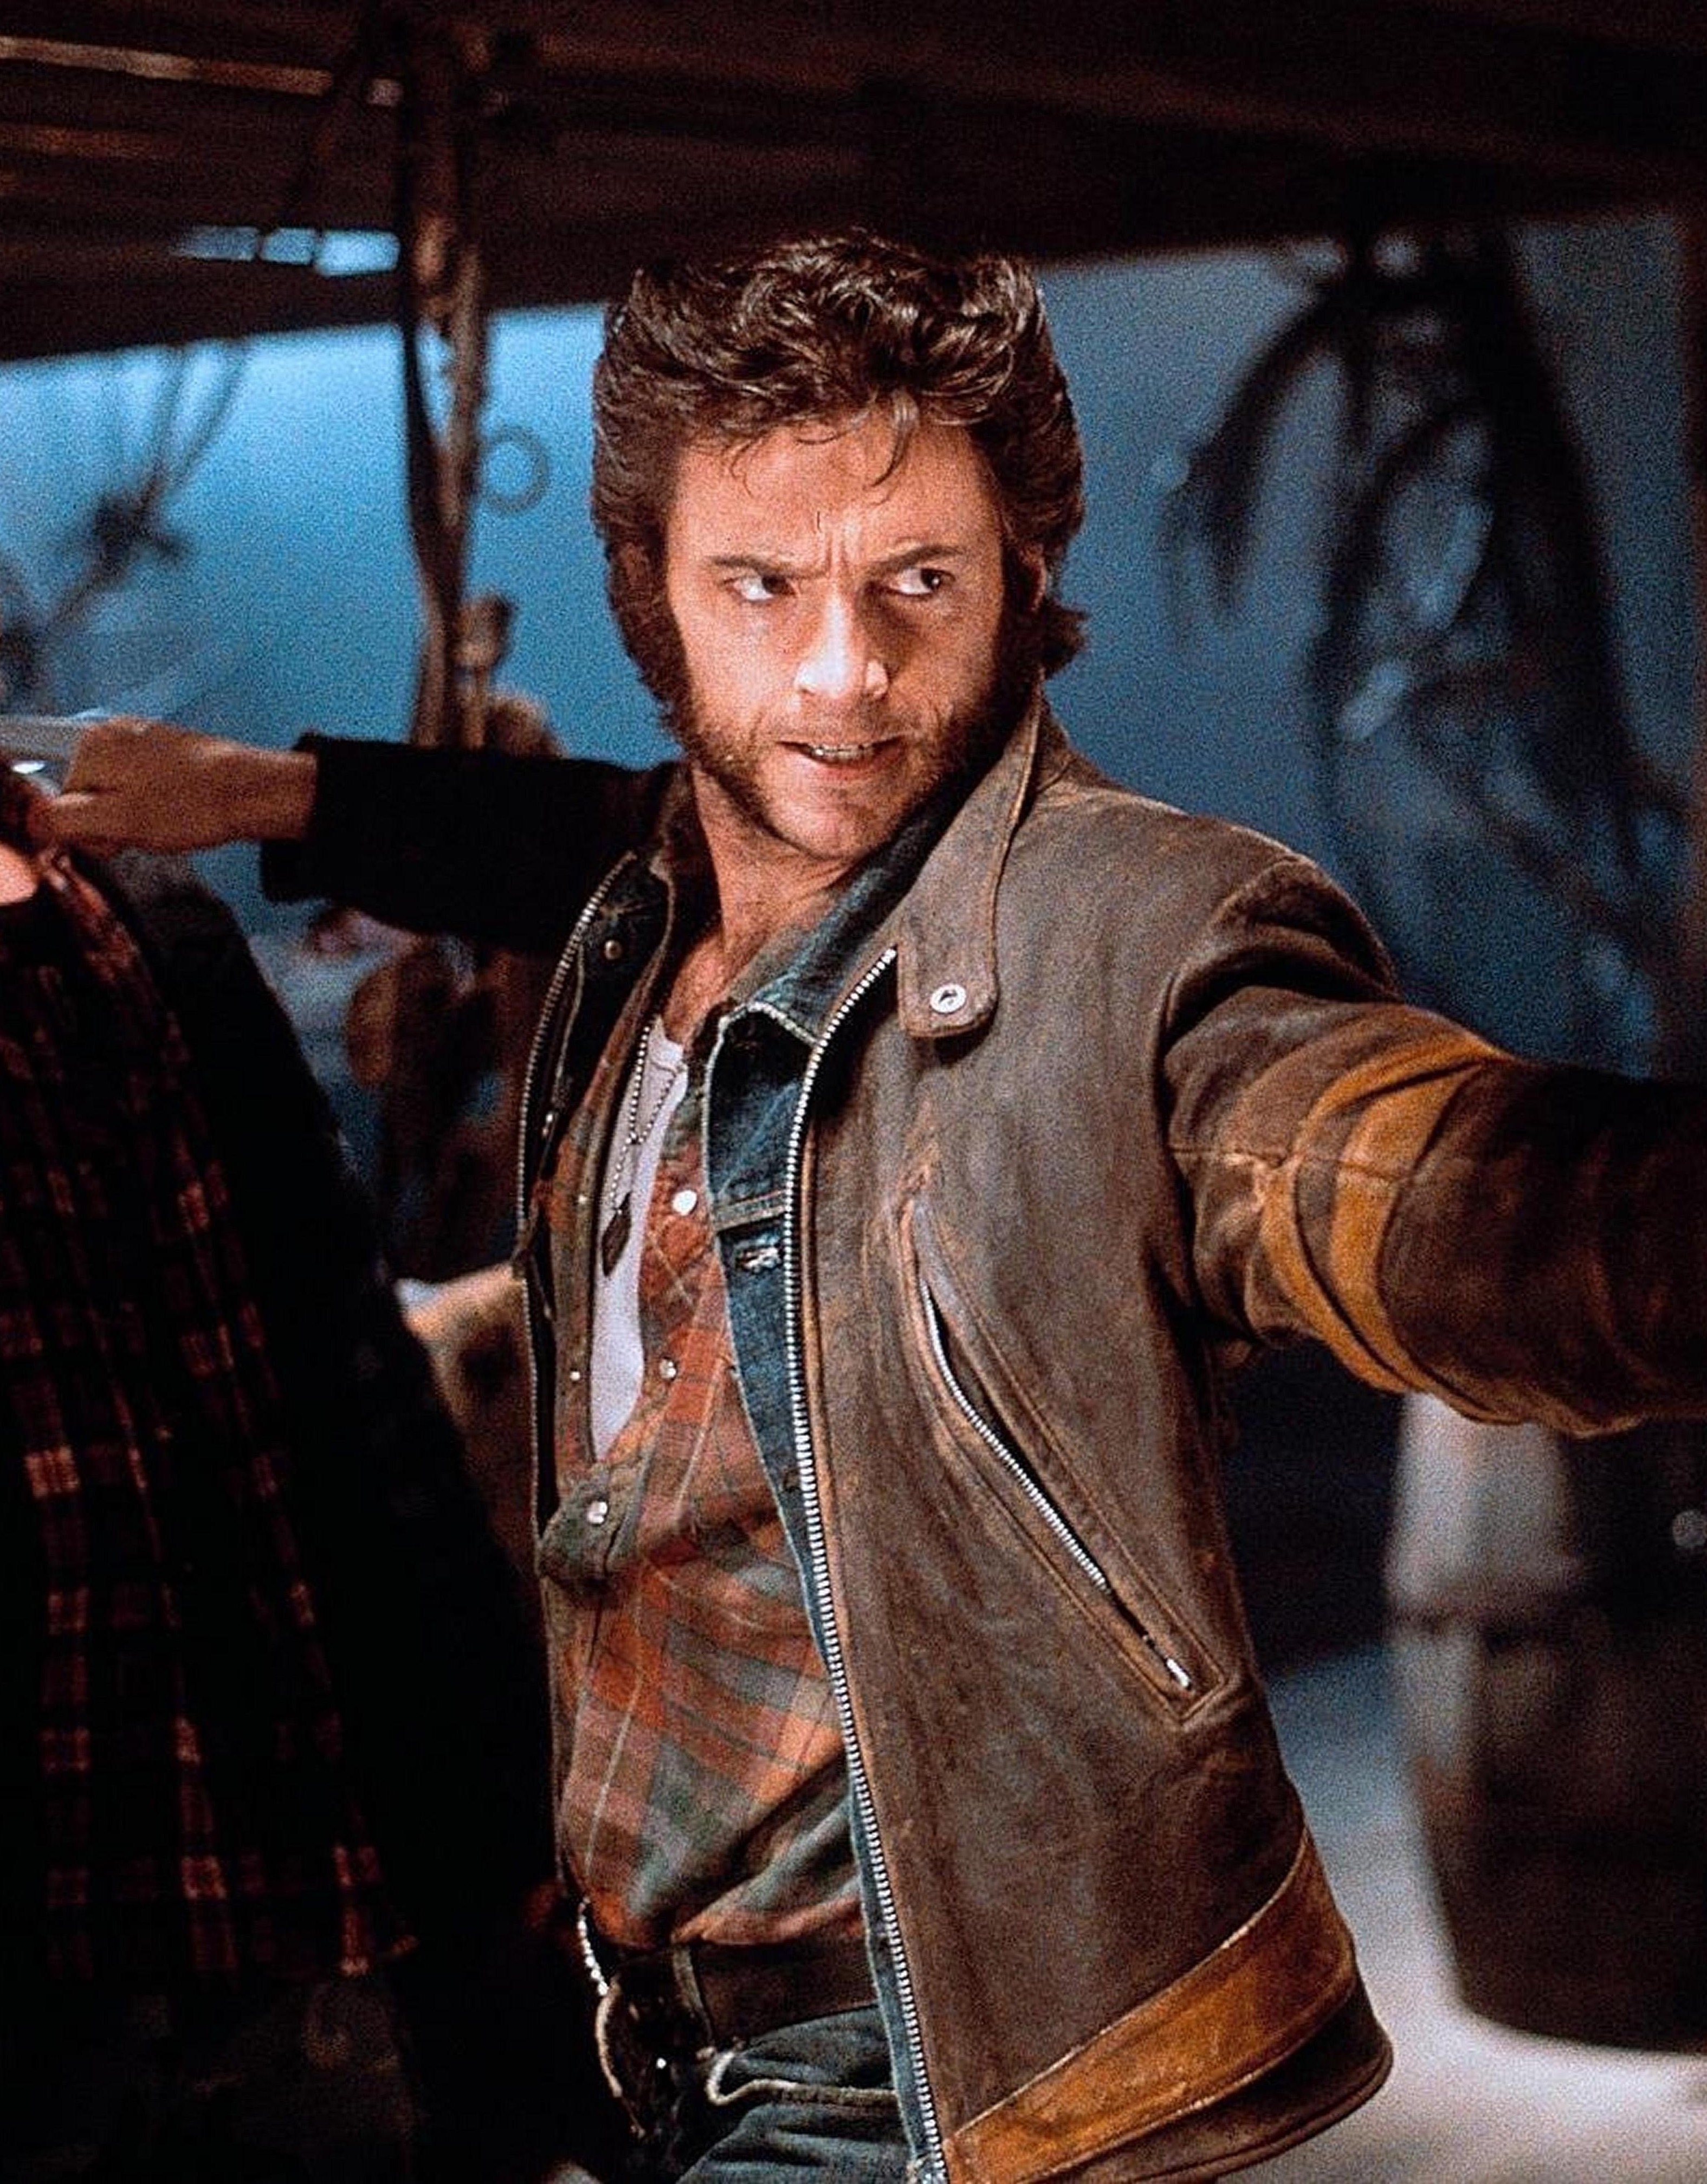 The Wolverine Jacket's Journey in Fashion Fame